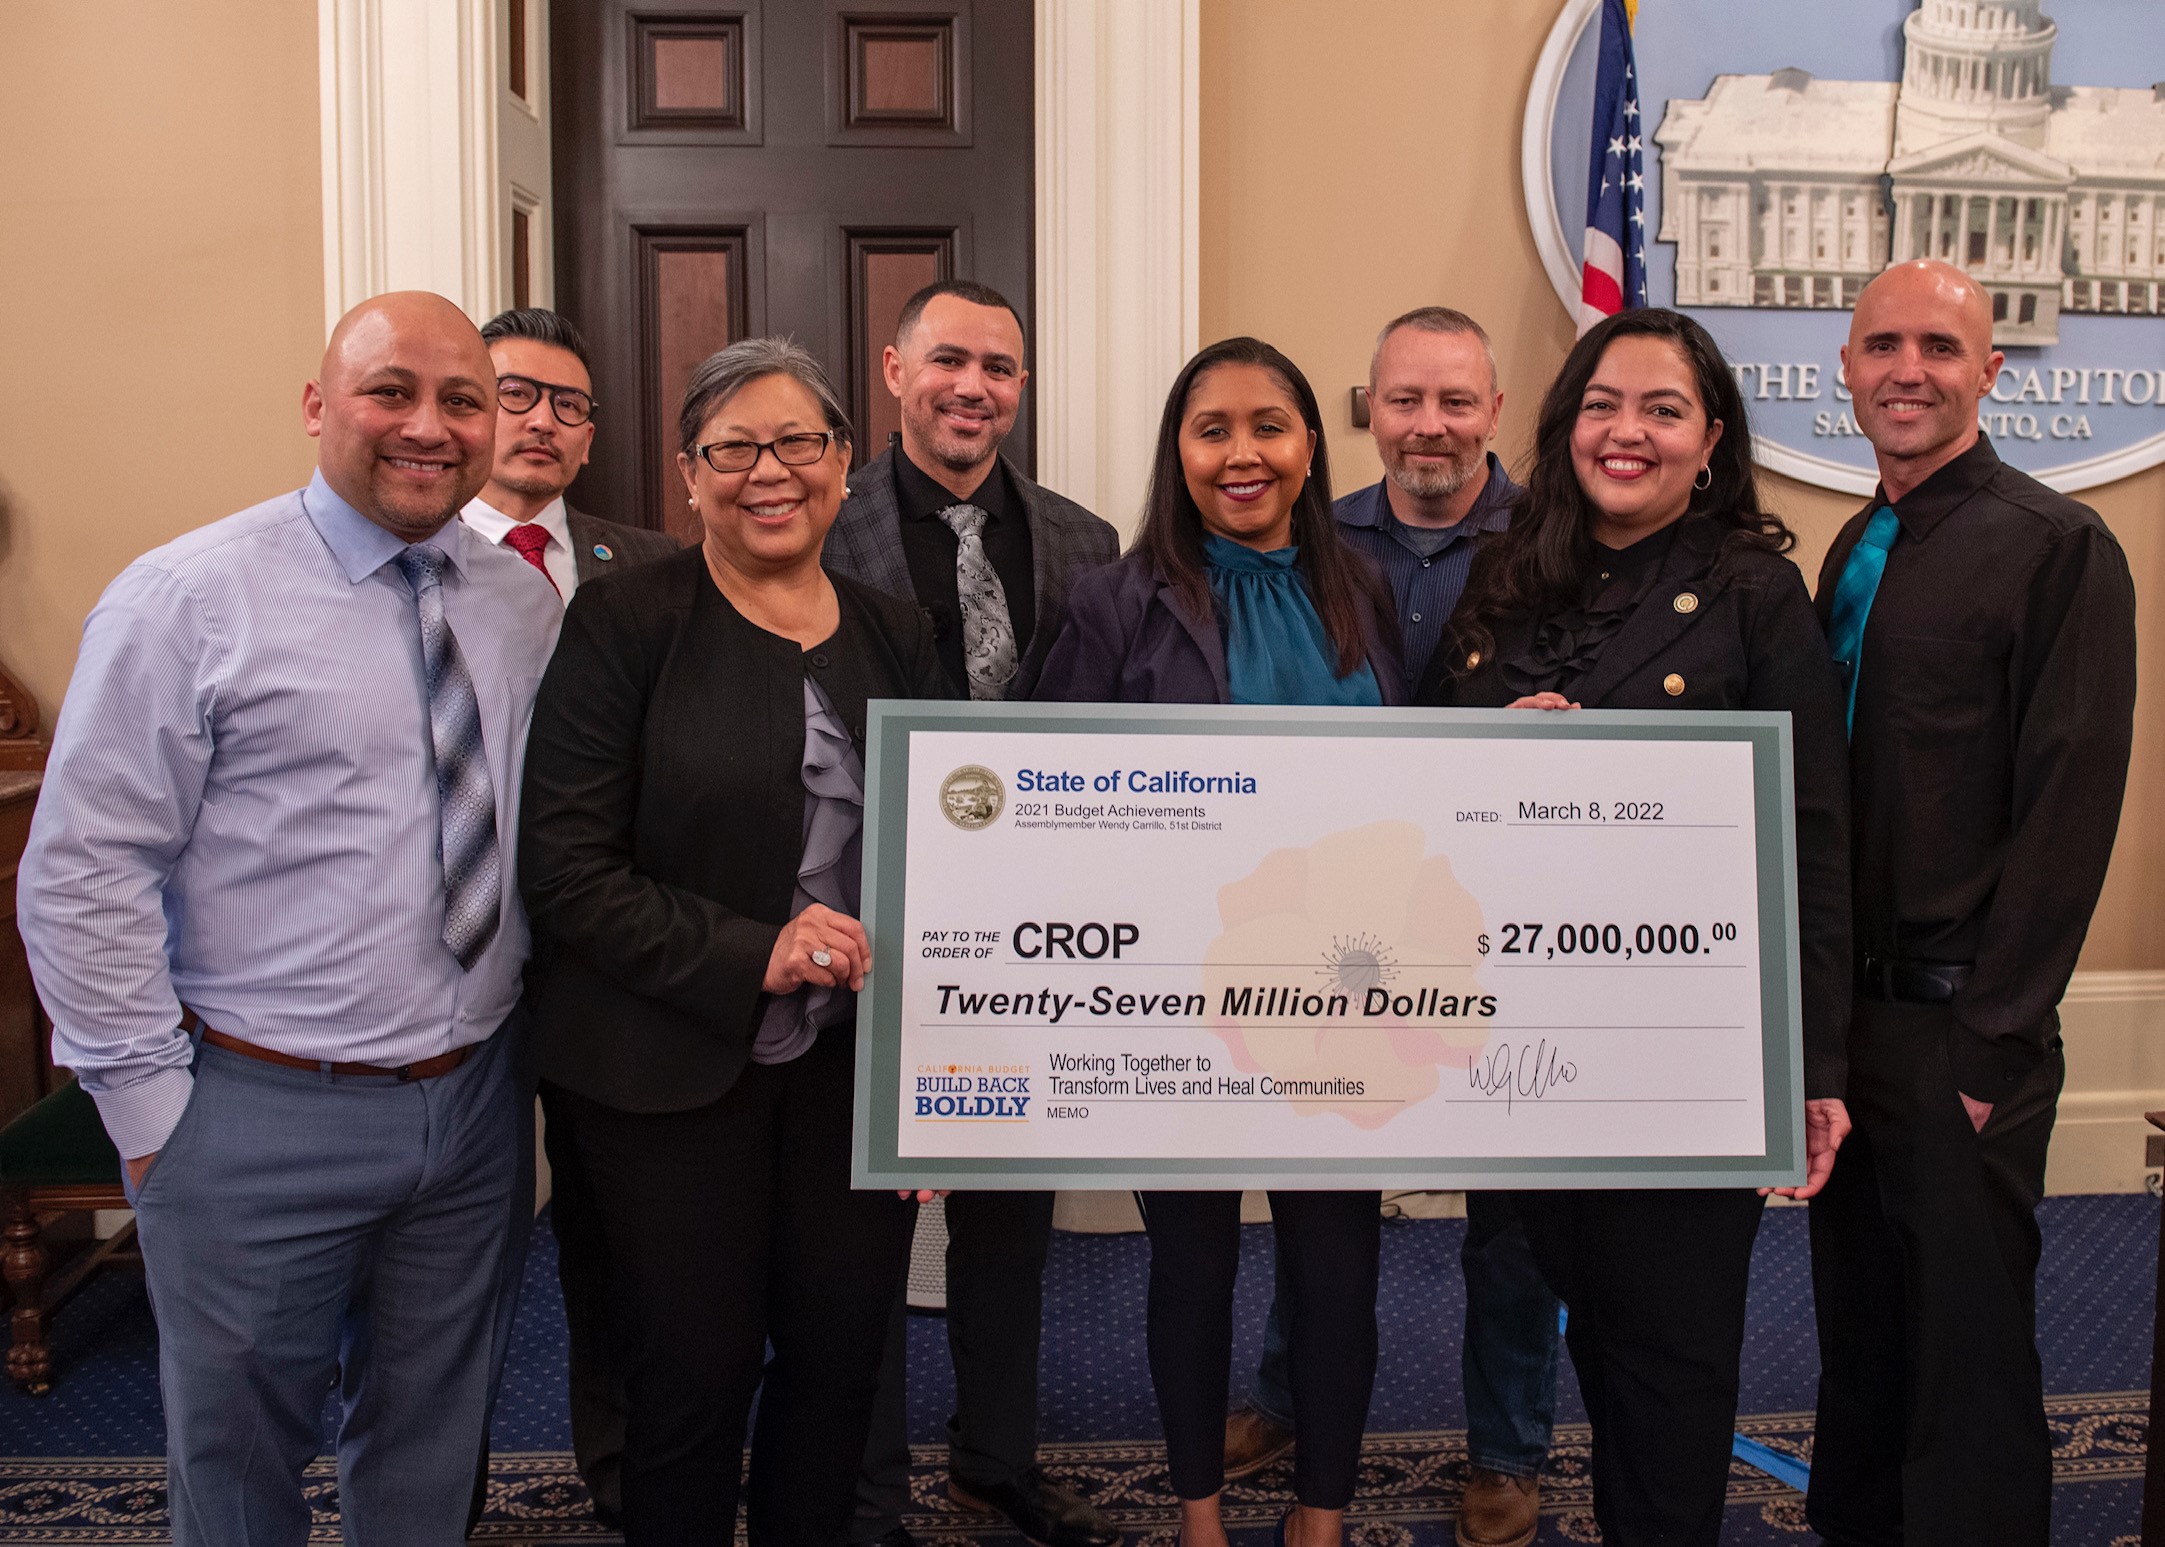 (LTR) Controller Betty Yee and Assemblywoman Wendy Carrillo with the CROP Leadership Team; Richard Mireles, Jason Bryan, Terah Lawyer-Harper, Ted Gray, Matt Braden, and Alfred Cheung, GoodMojo CEO/Founder.